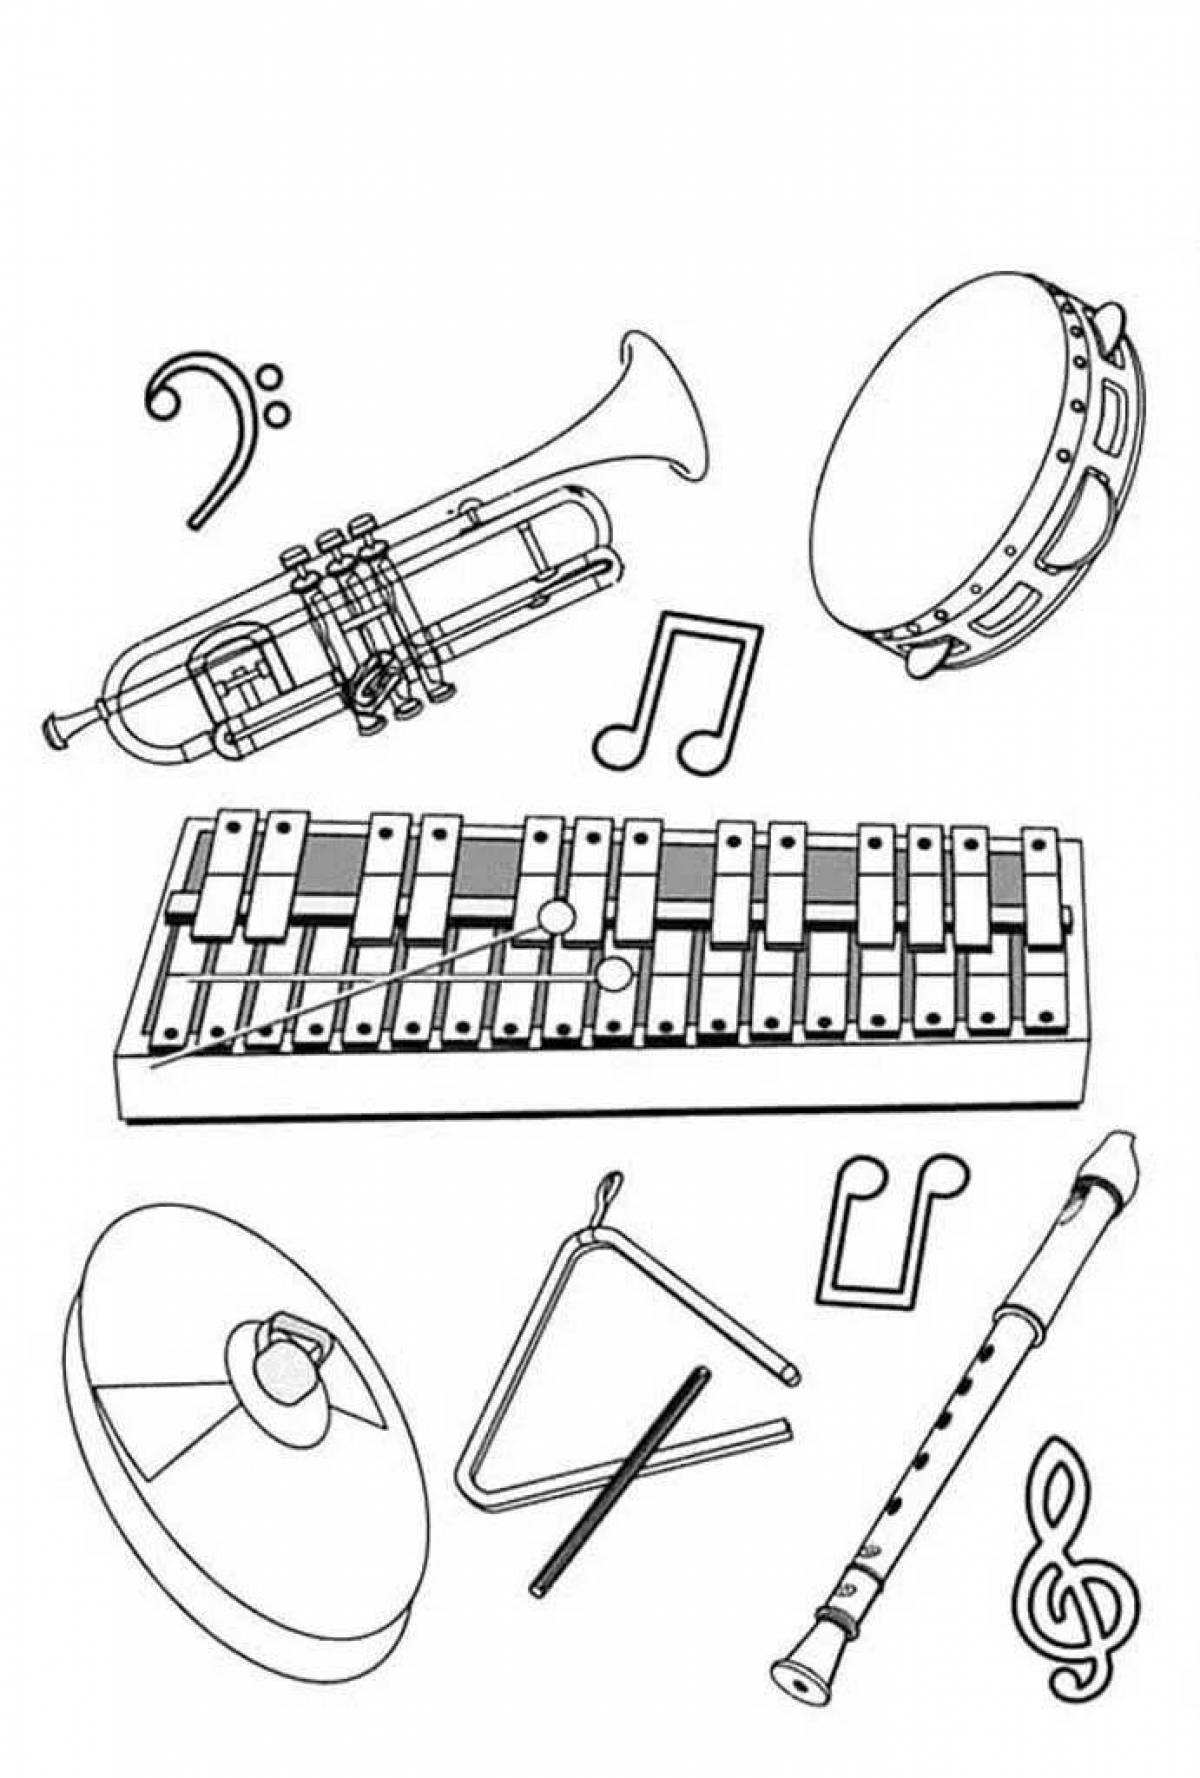 Musical instruments for children 6 7 years old #6